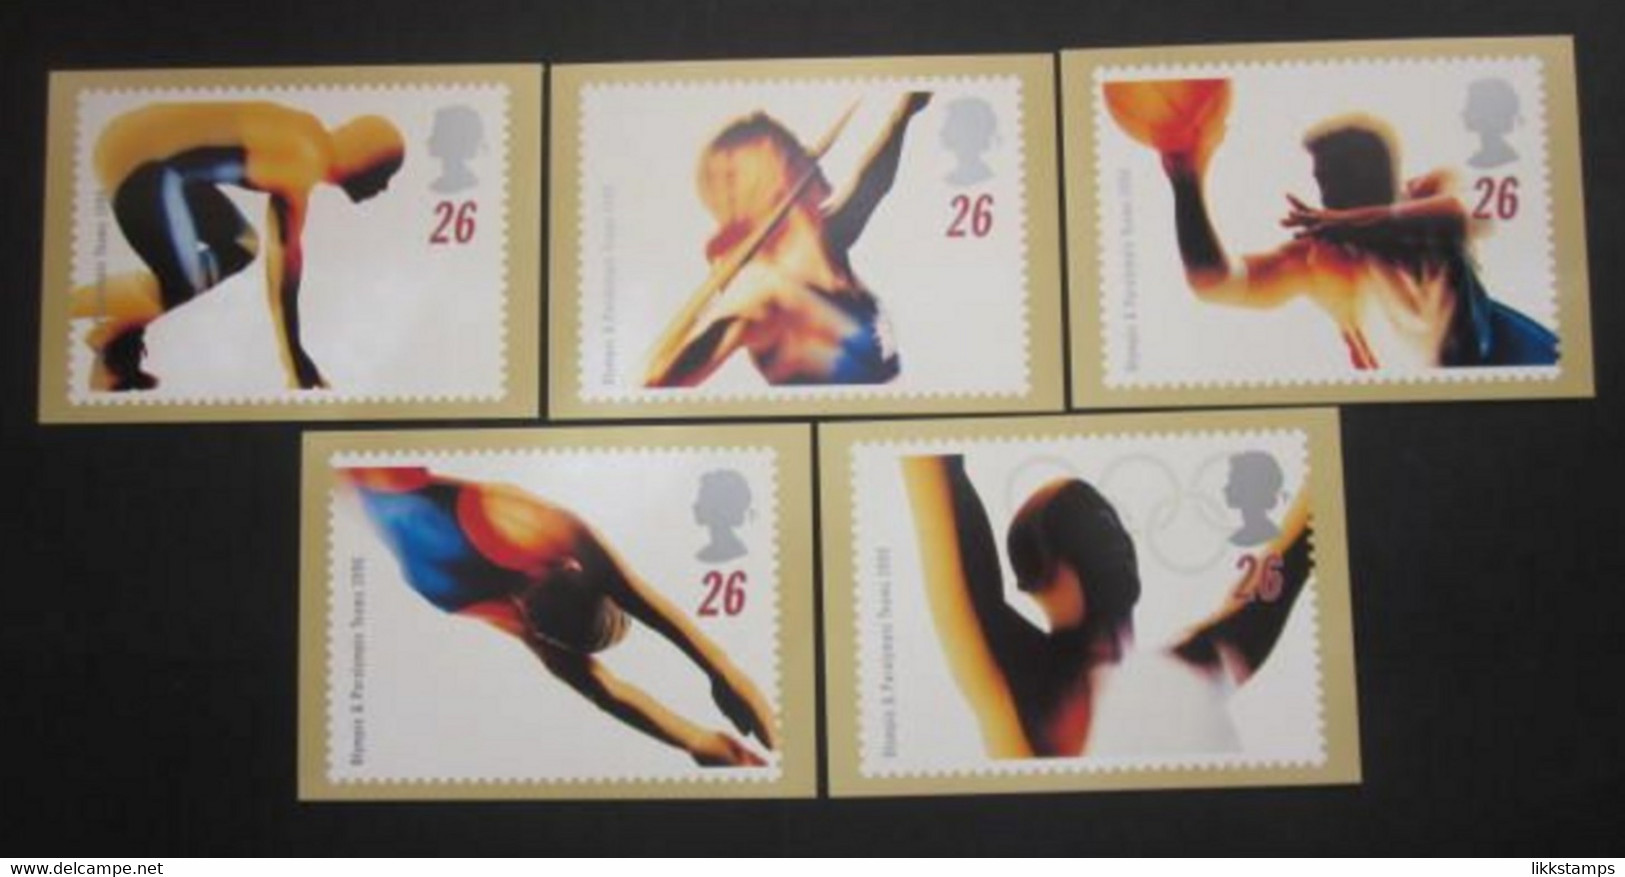 1996 THE OLYMPIC AND PARALYMPIC GAMES P.H.Q. CARDS UNUSED, ISSUE No. 180 (B) #01050 - Cartes PHQ